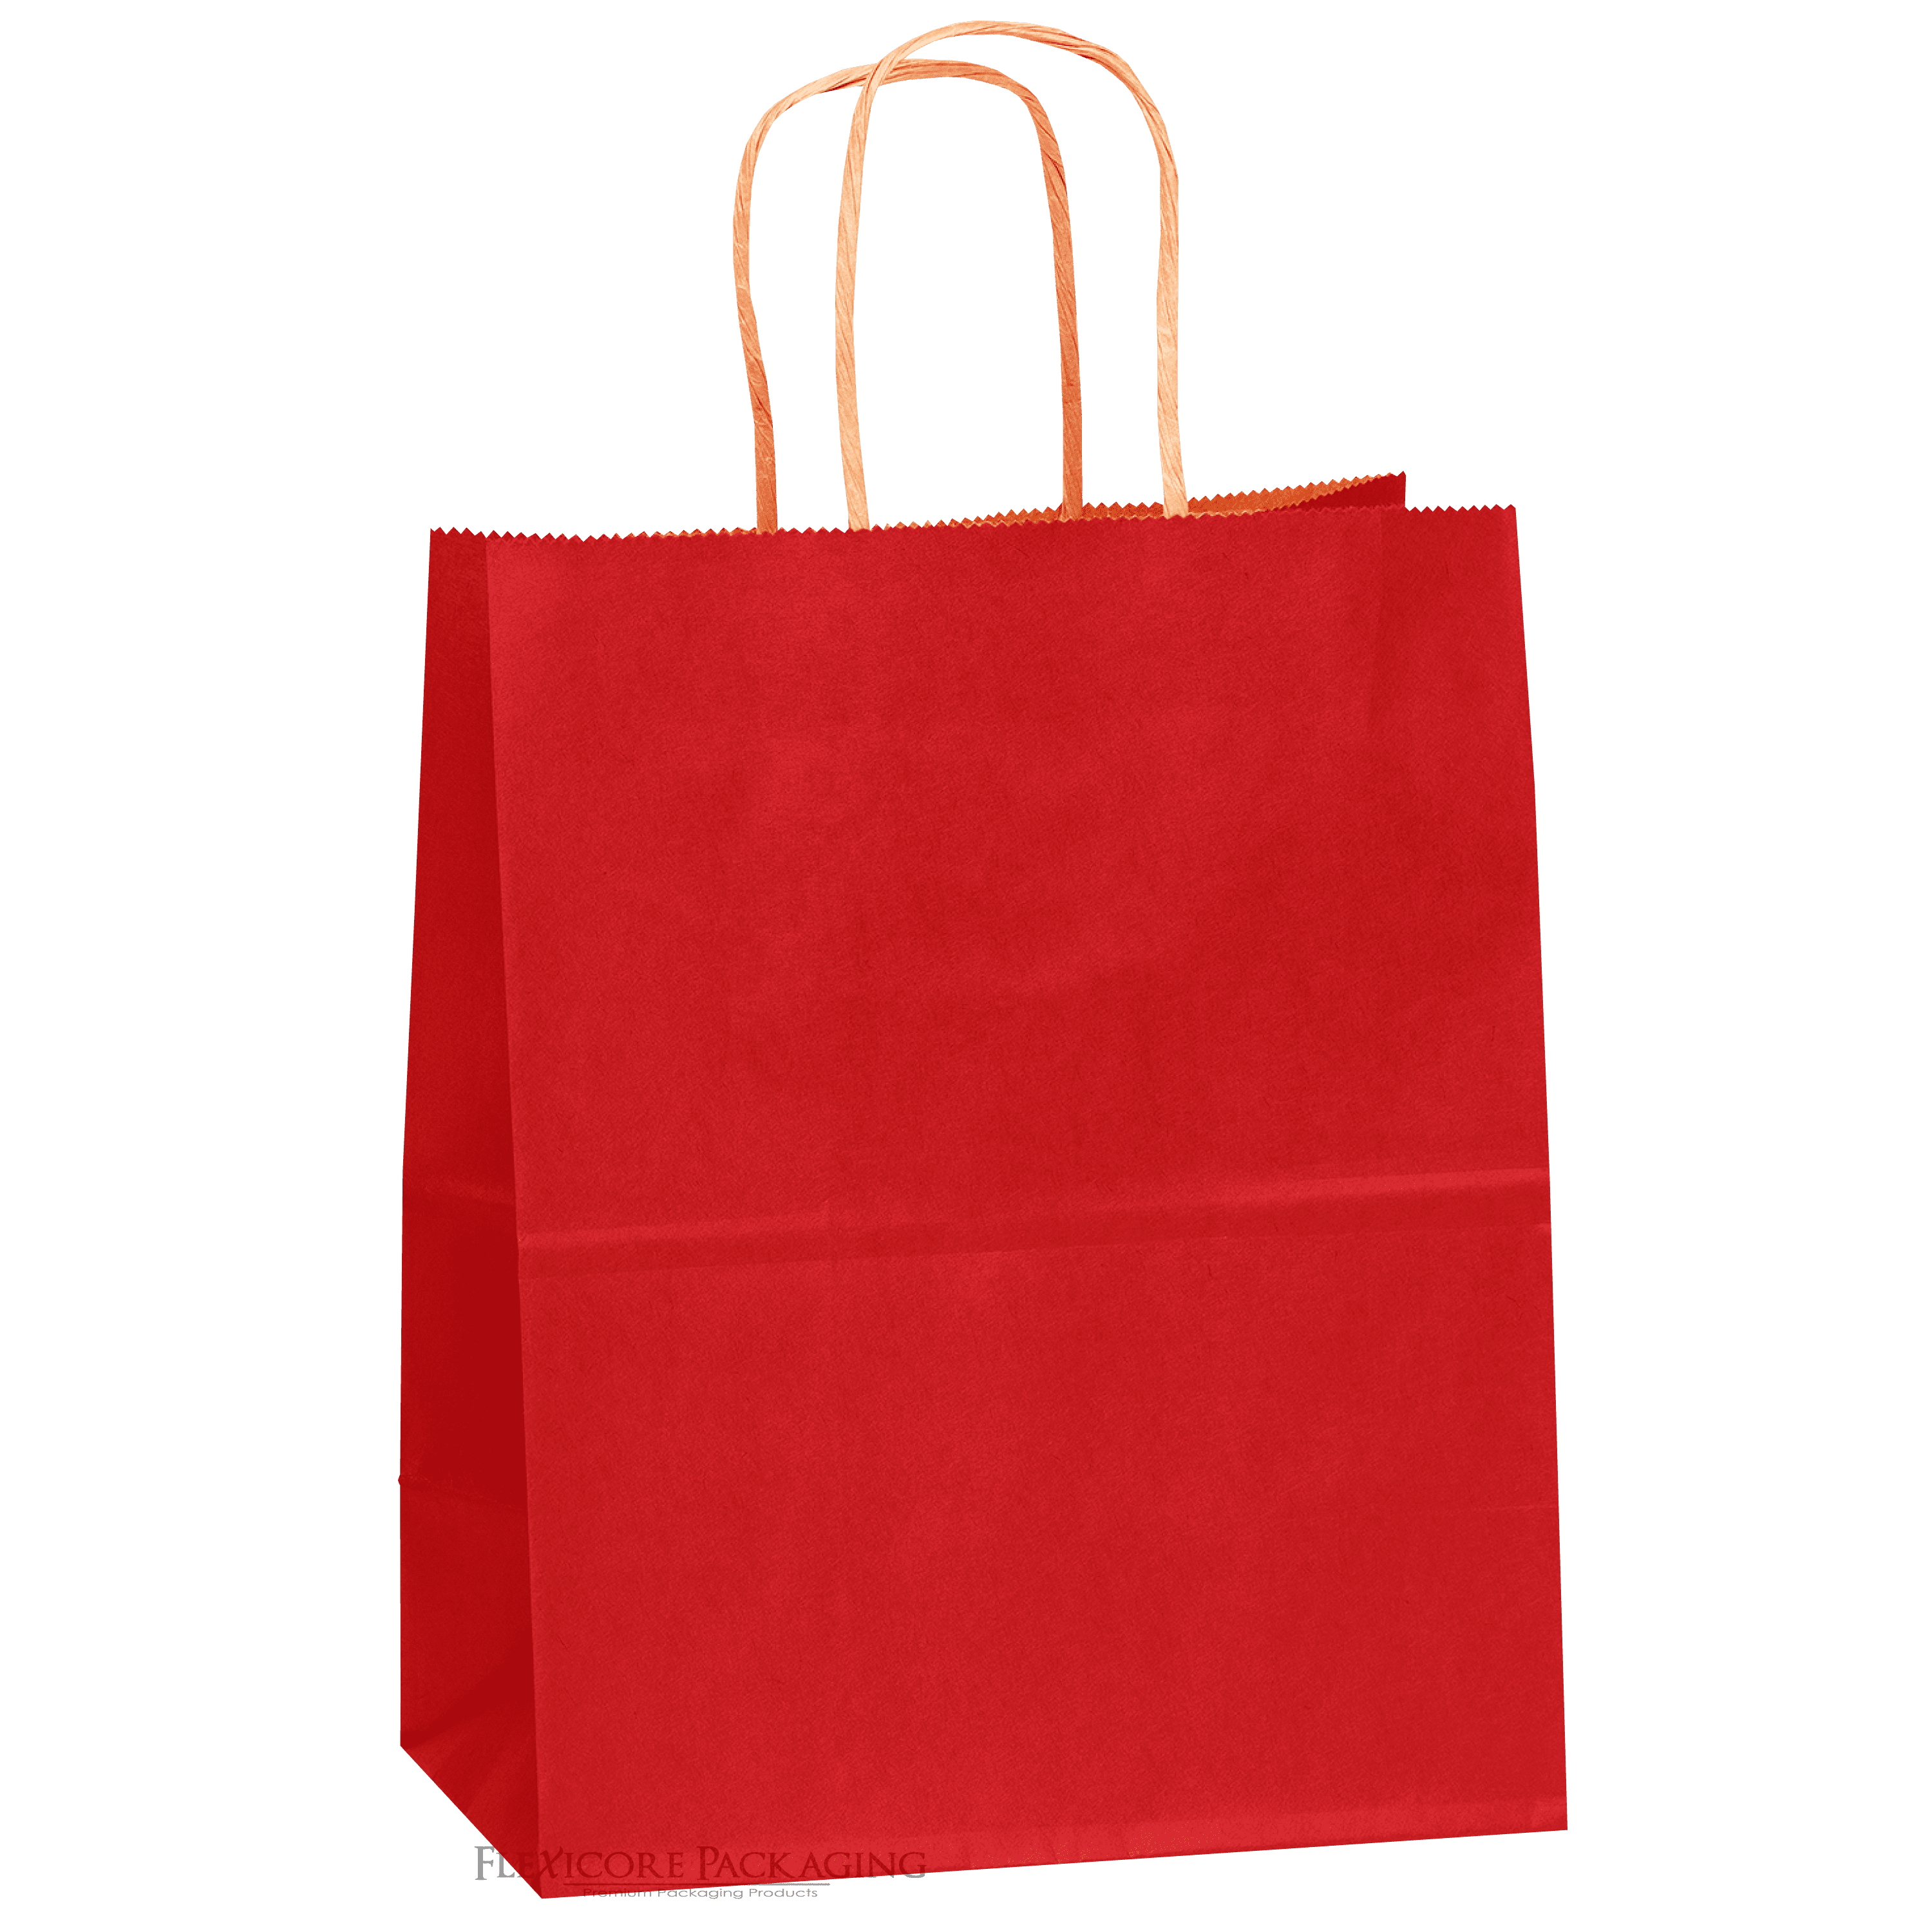 20 x 18 x 8 Size 9 Party Paper Carrier Bags with Twisted Paper Handles 